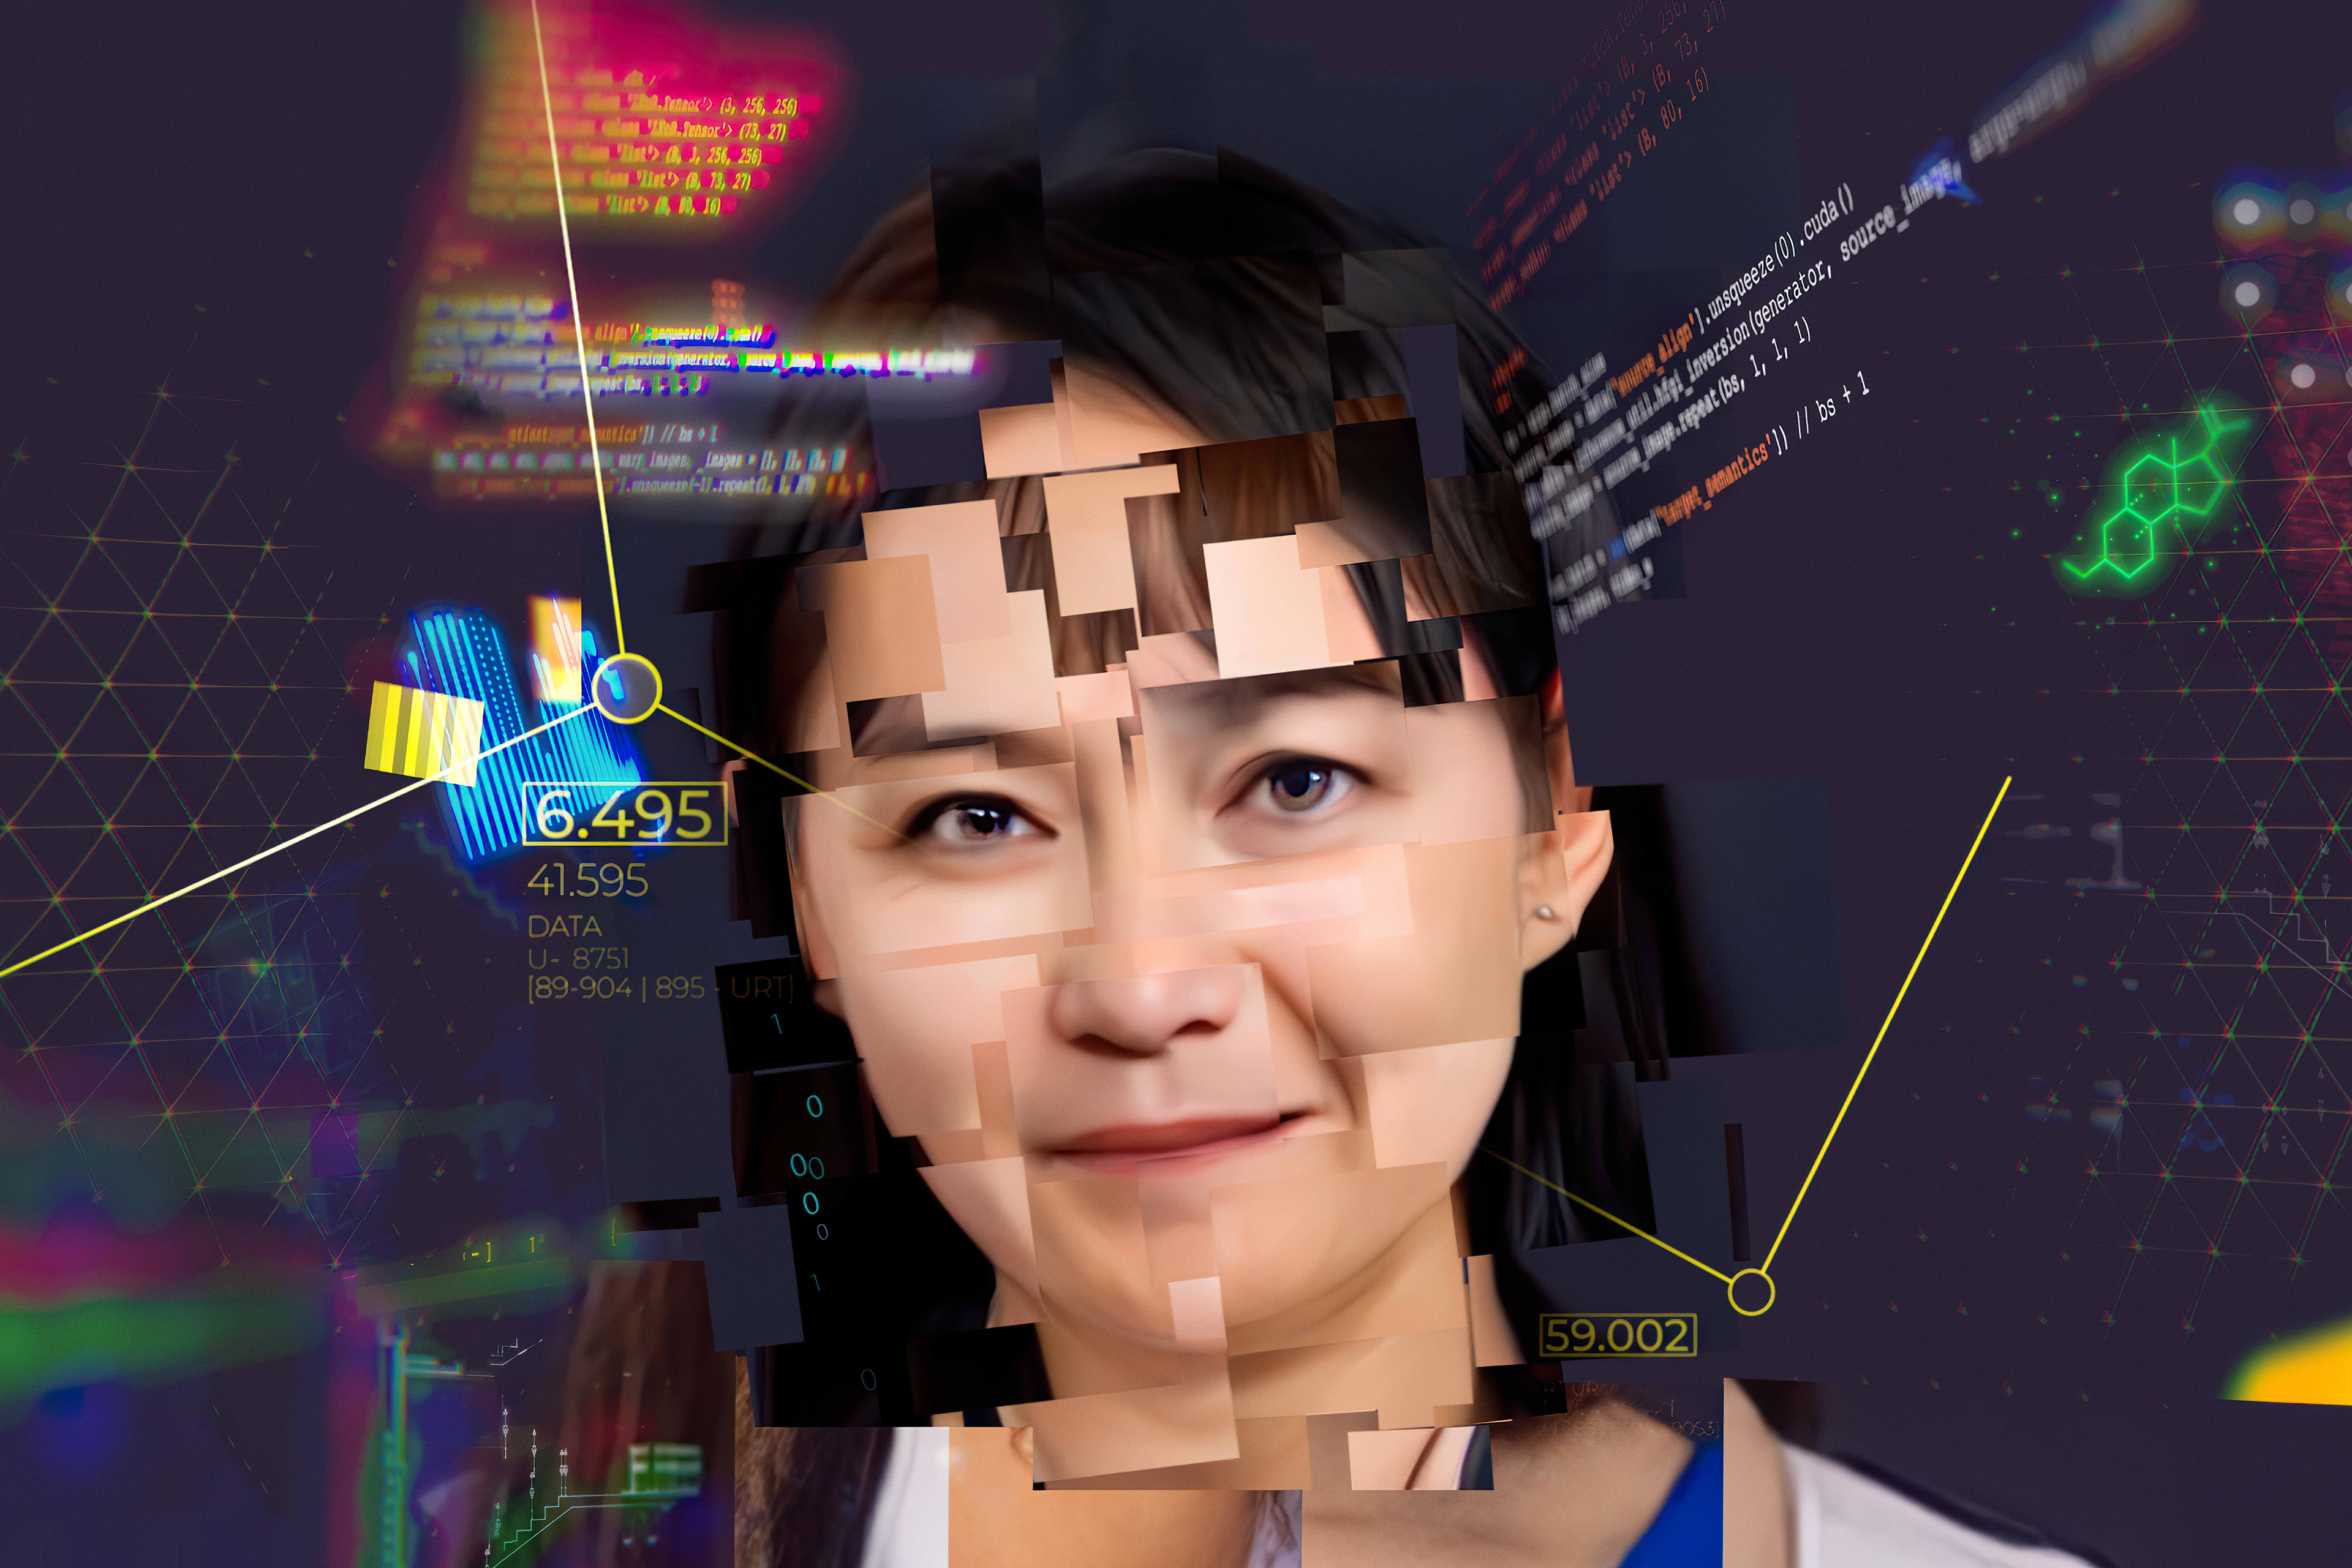 Image made with AI technology, featuring EY people worldwide.